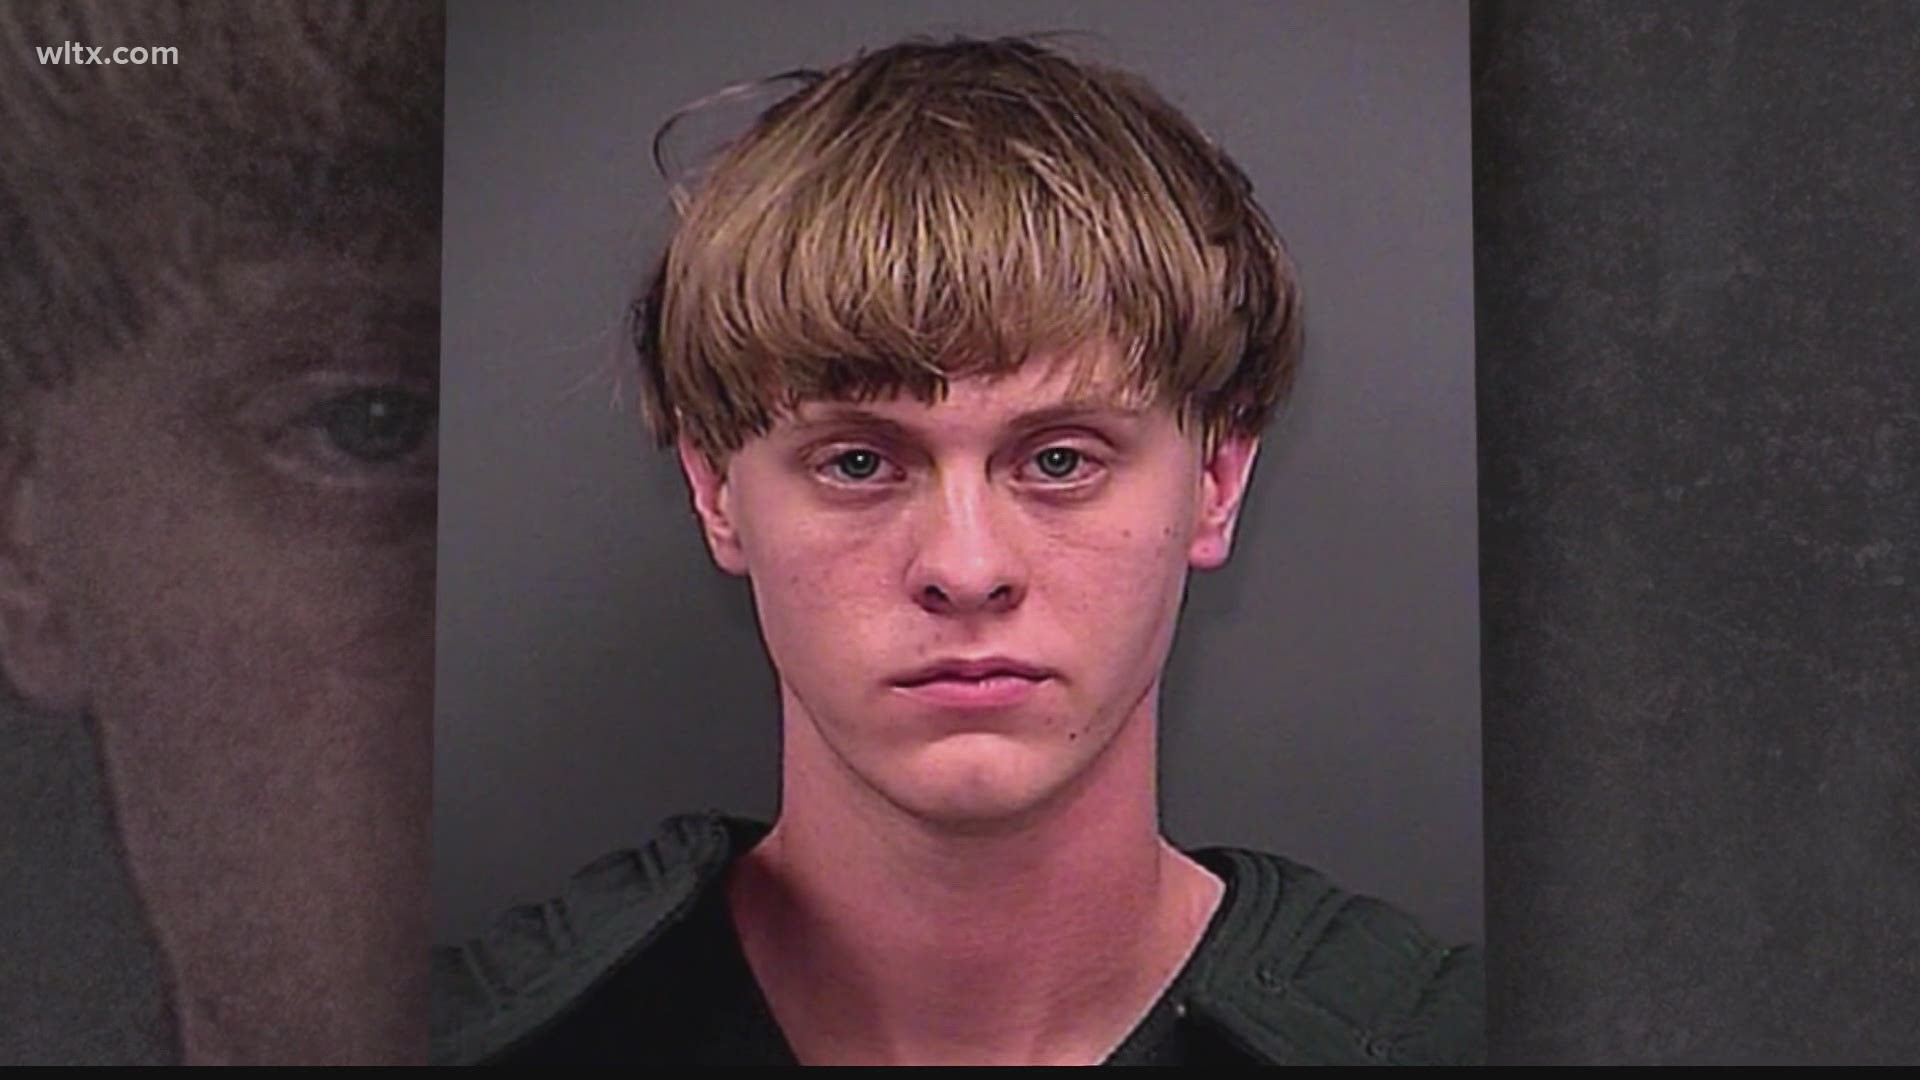 Federal court records show oral arguments have been set for May 25 before the 4th U.S. Circuit Court of Appeals in the case of Dylann Roof.